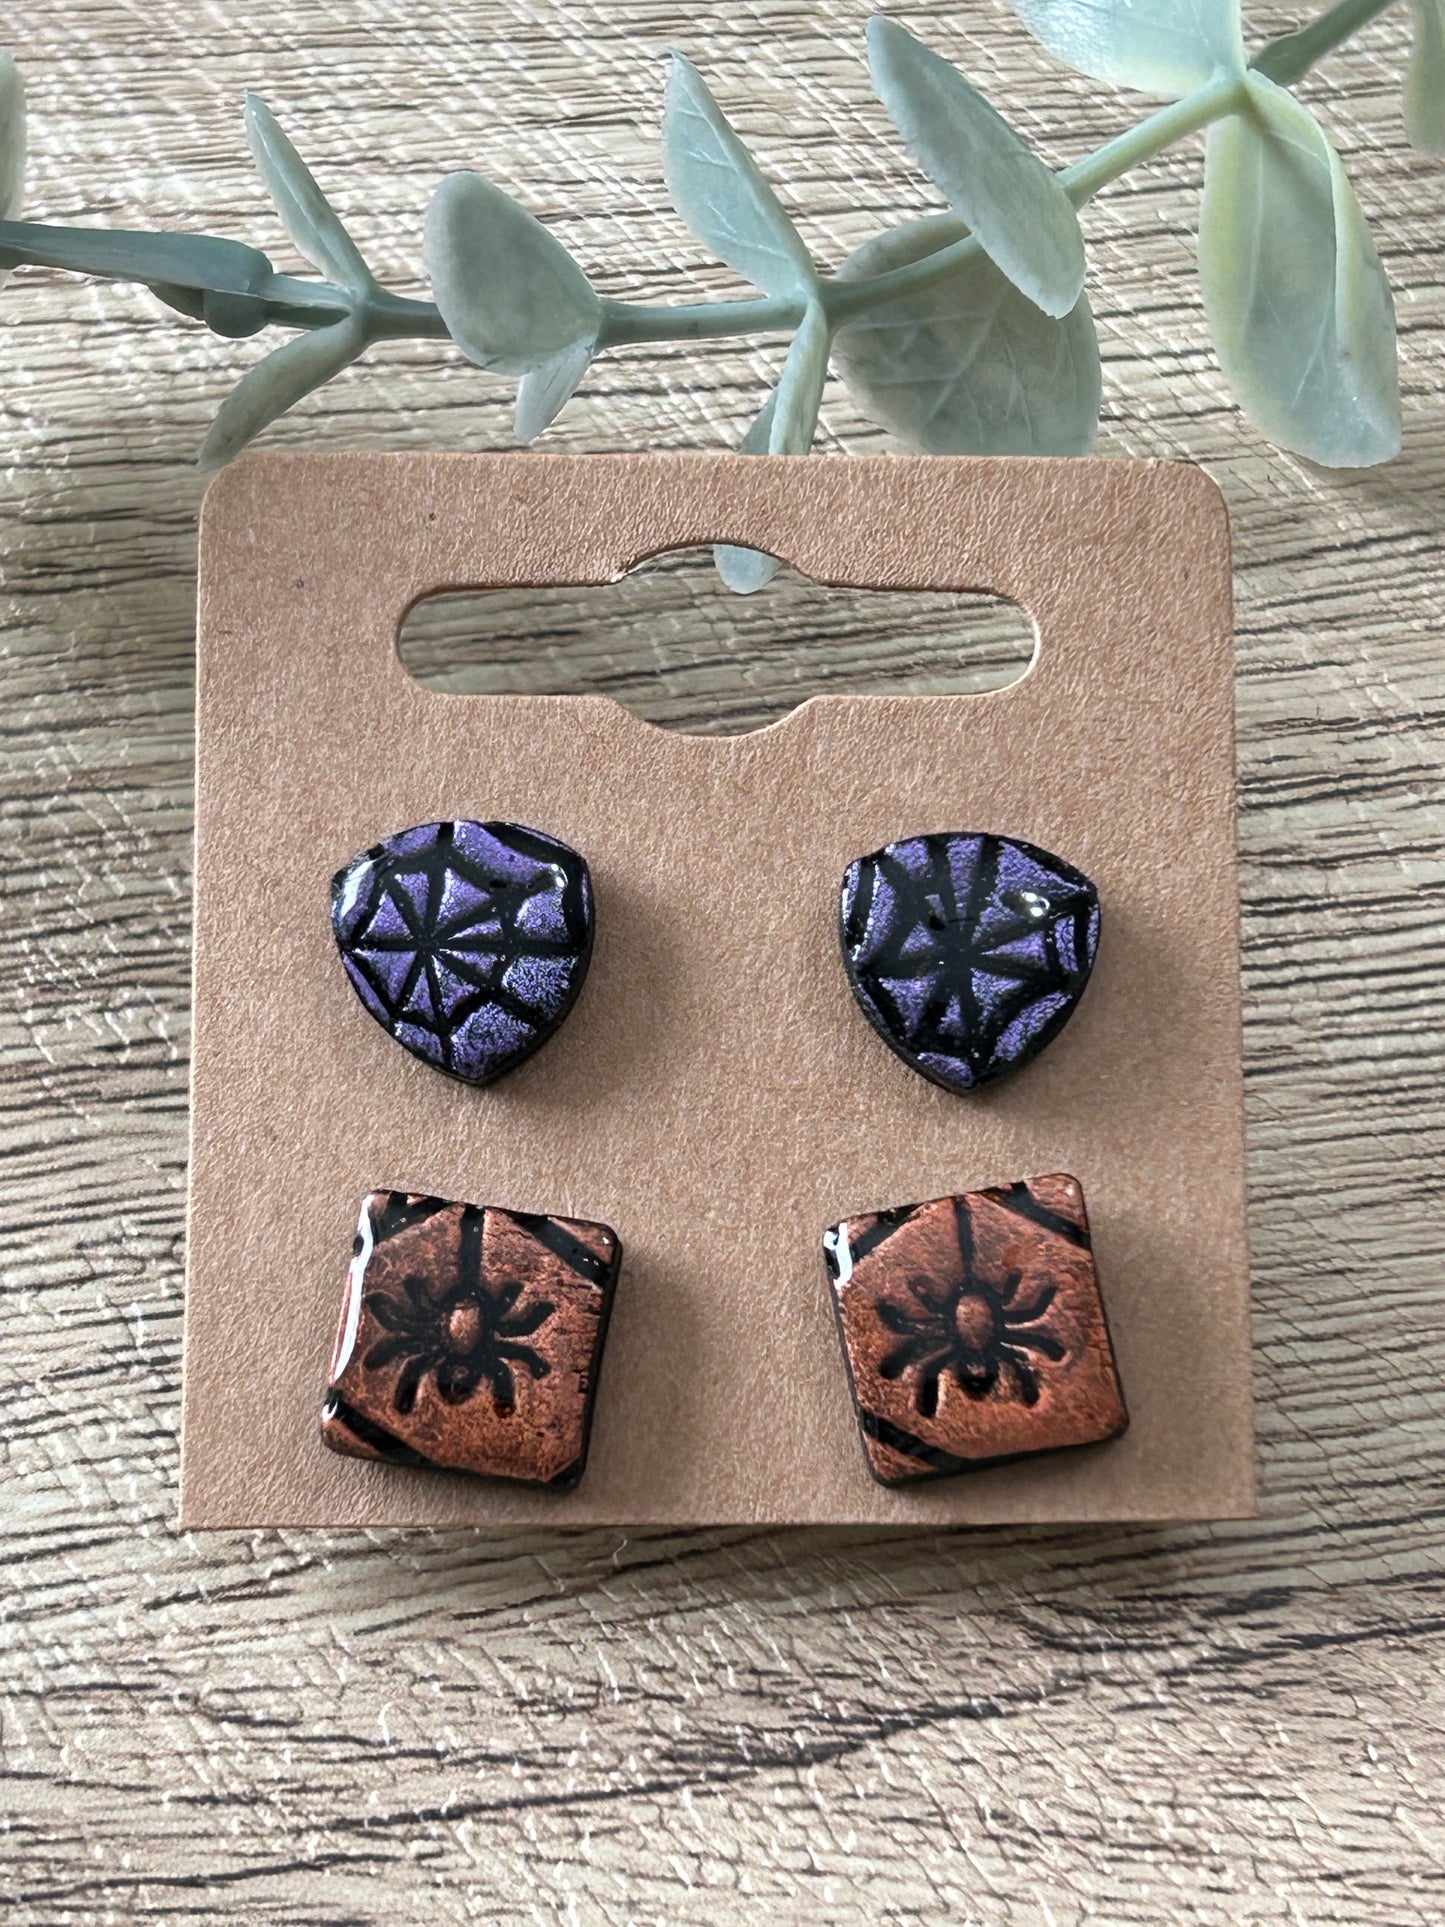 2 Pairs Halloween Spider and Web Statement Stud Earrings YOU CHOOSE From 2 Styles